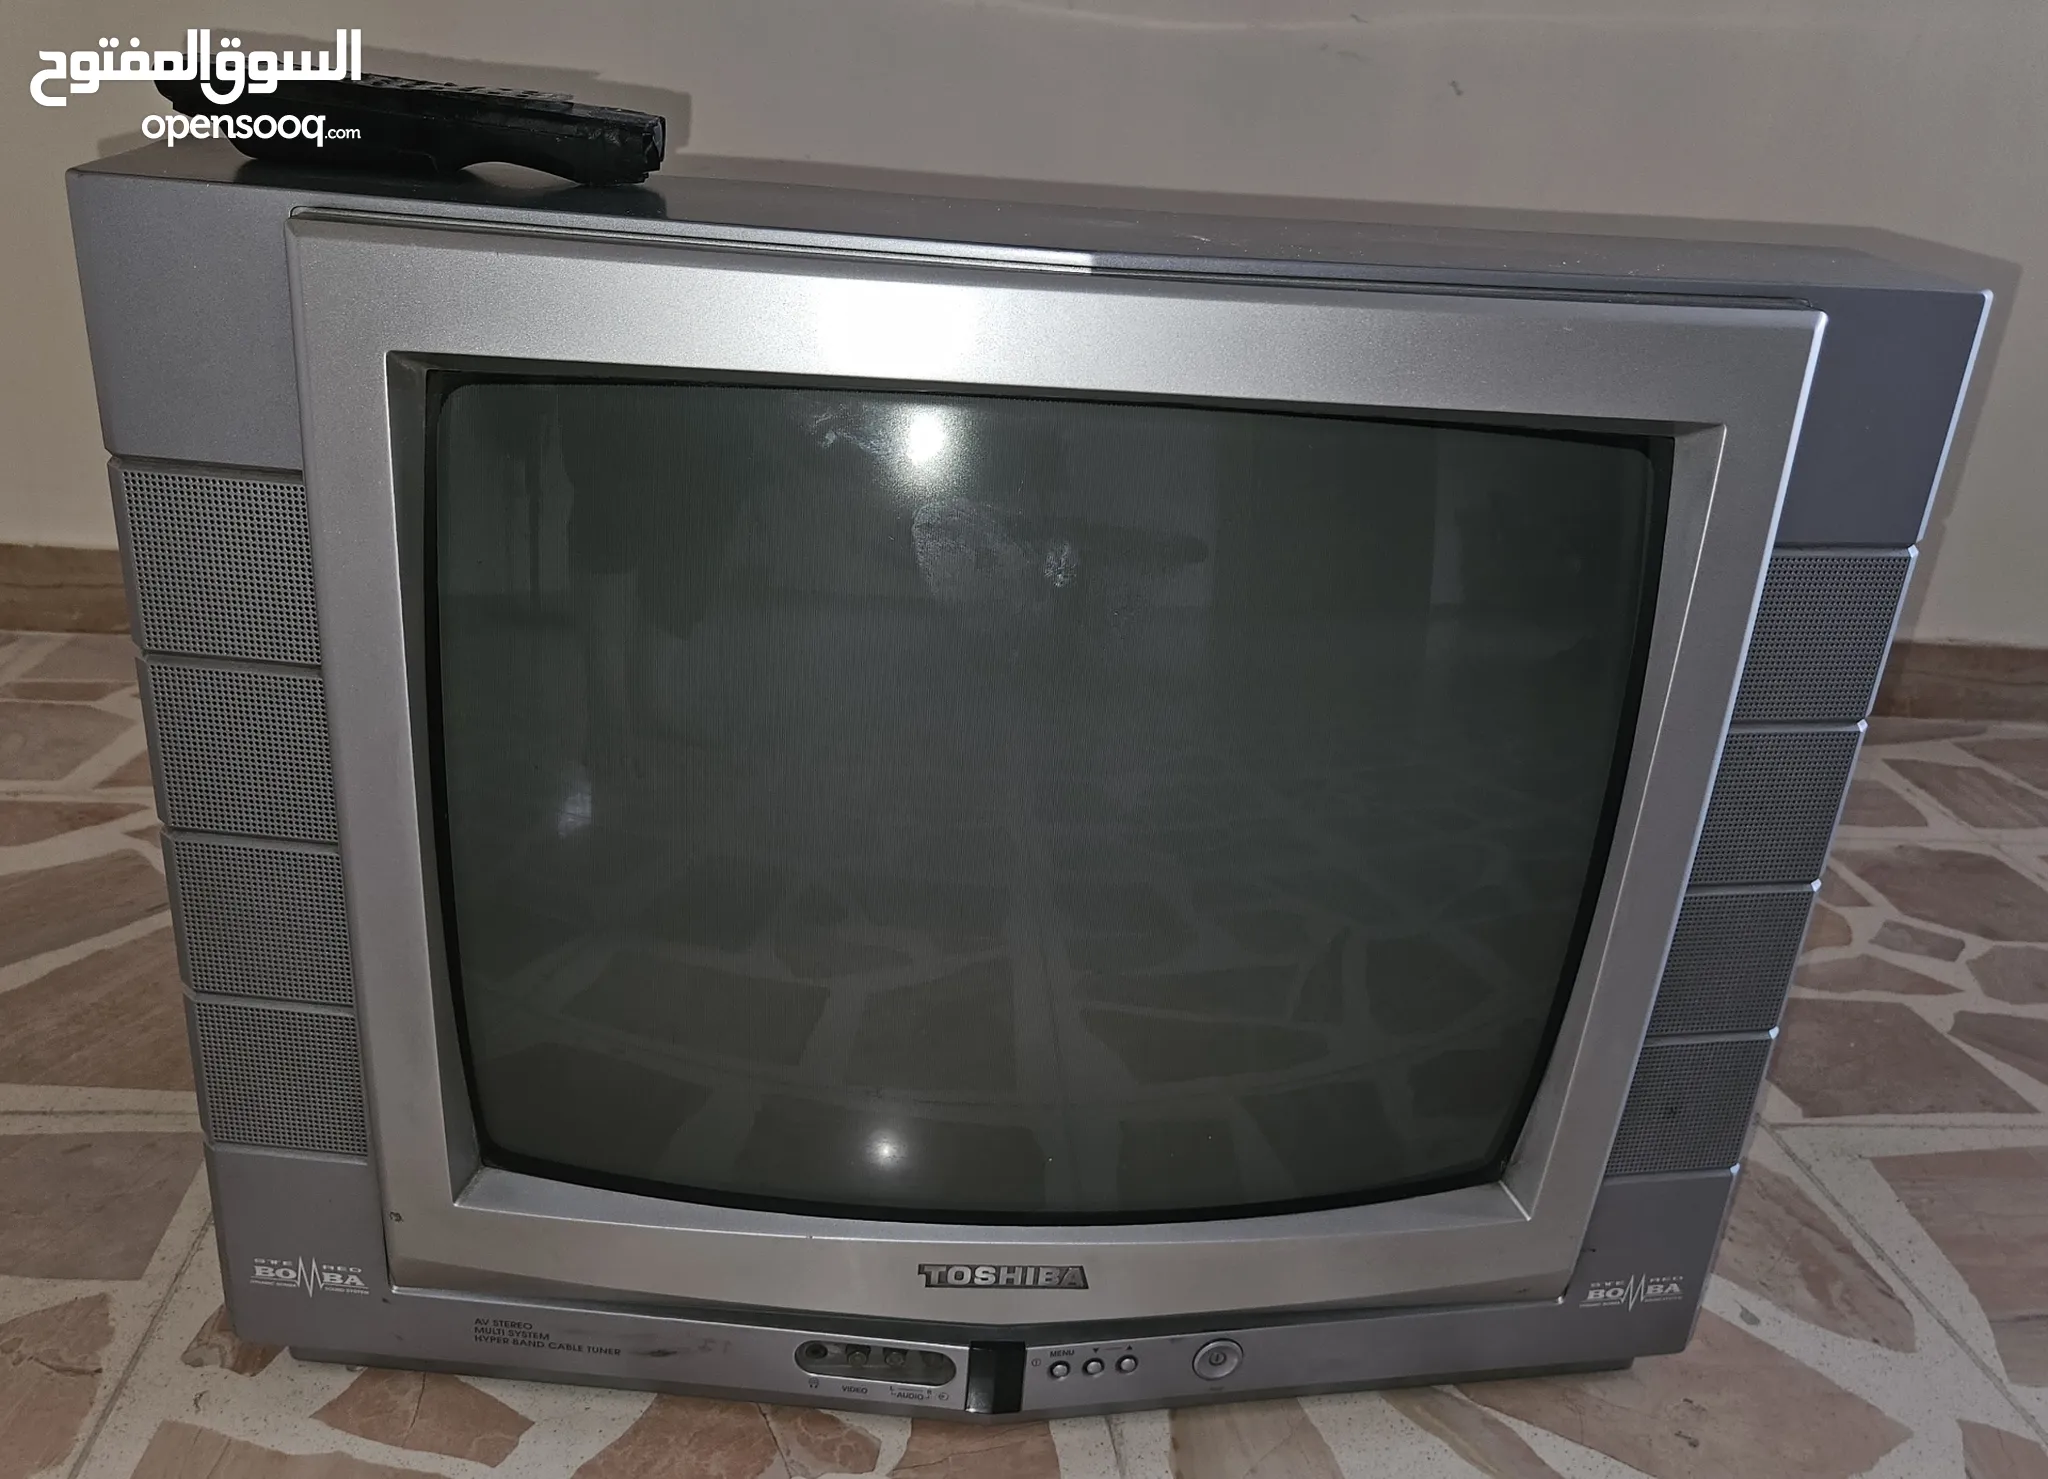 Toshiba TV & Monitors & Screens For Sale in Amman: Best Prices | OpenSooq